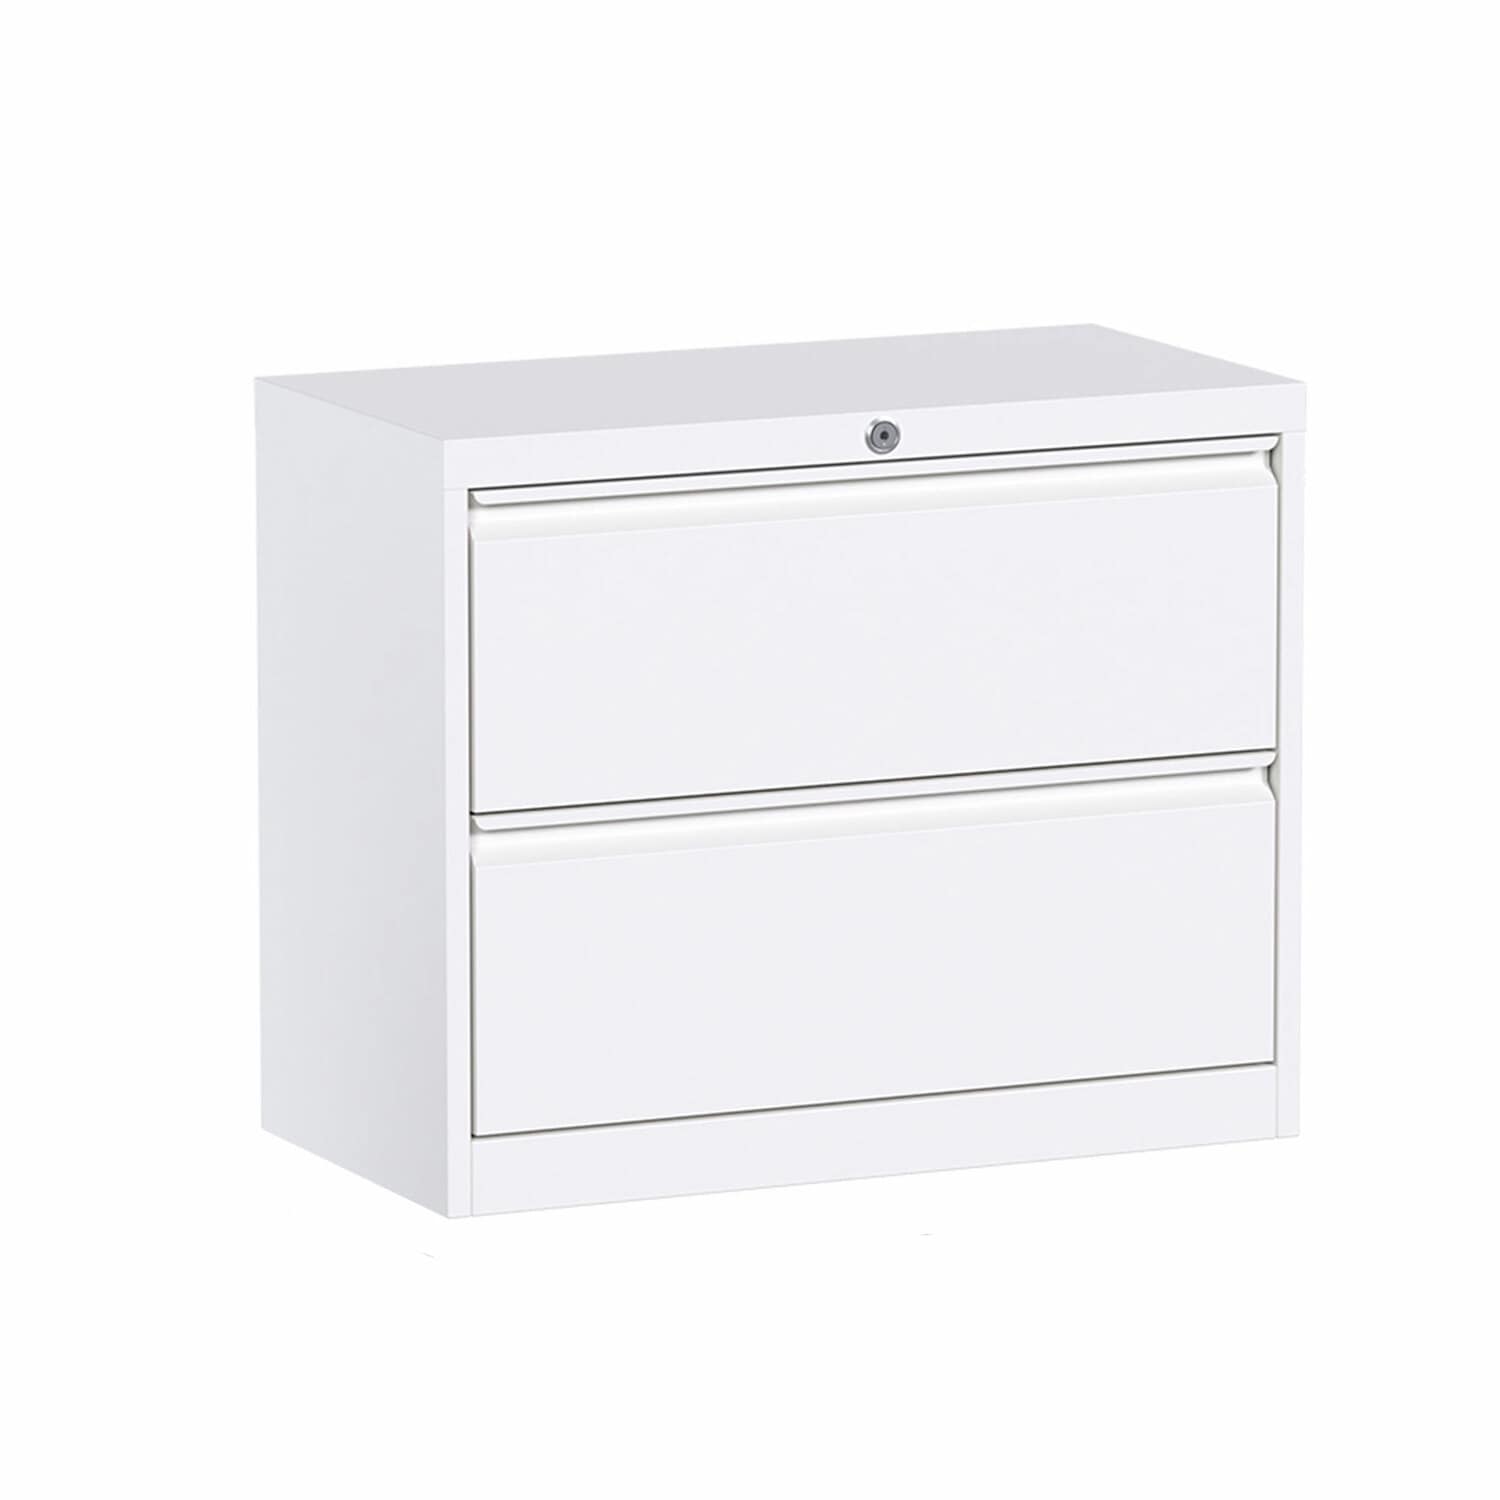 Aobabo Metal Storage Cabinet with Lock,Garage Storage Cabinet with Whe